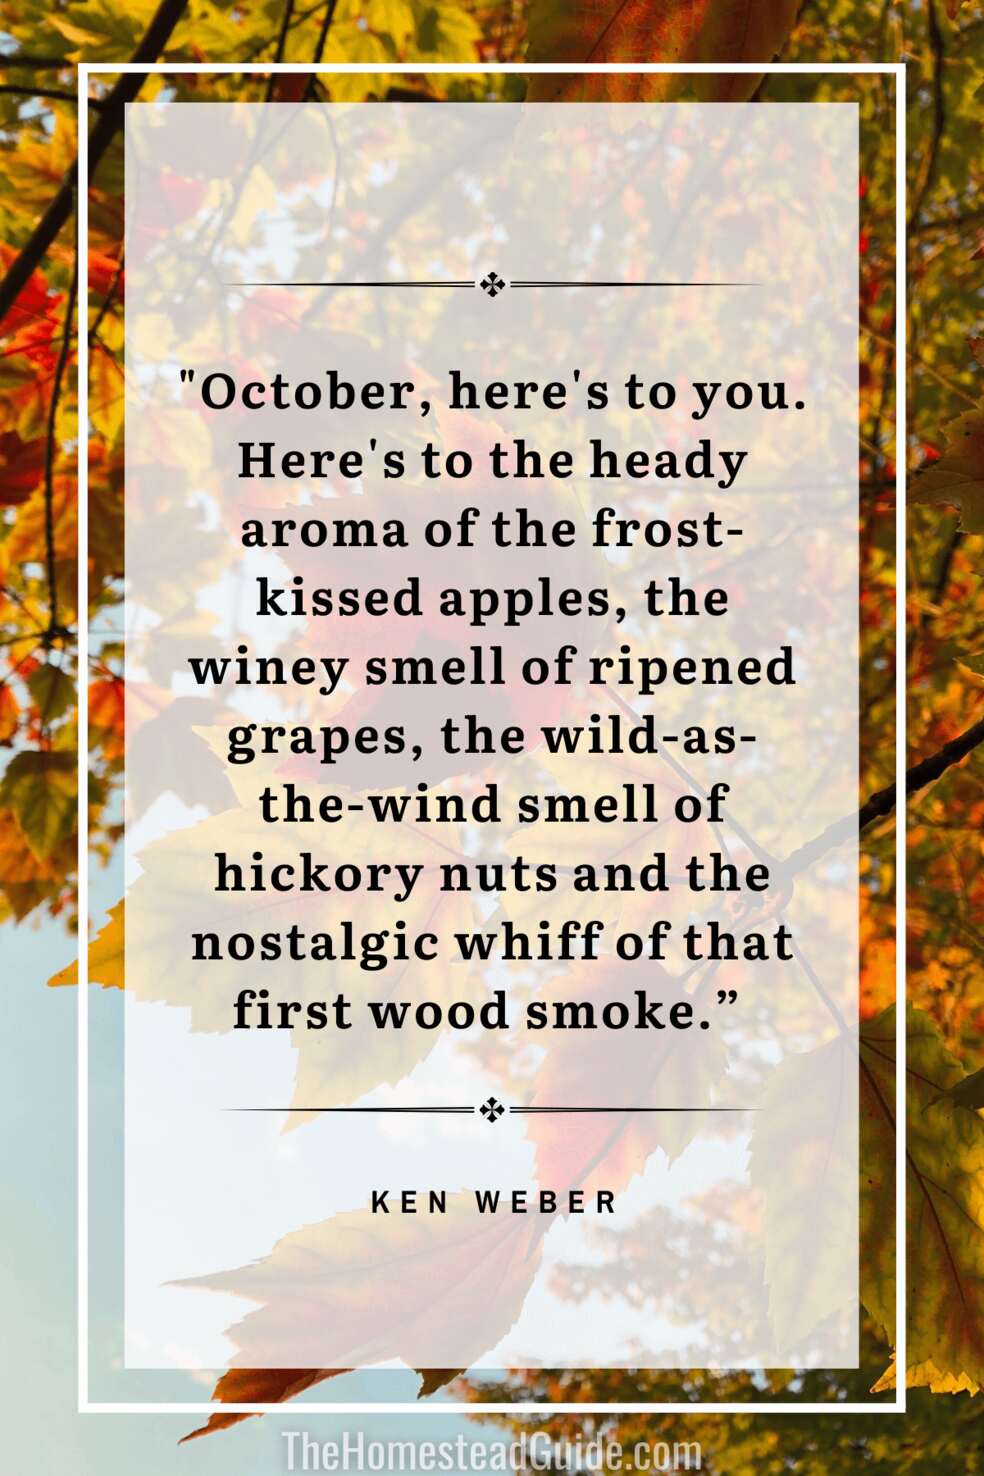 October, here's to you. Here's to the heady aroma of the frost-kissed apples, the winey smell of ripened grapes, the wild-as-the-wind smell of hickory nuts and the nostalgic whiff of that first wood smoke.